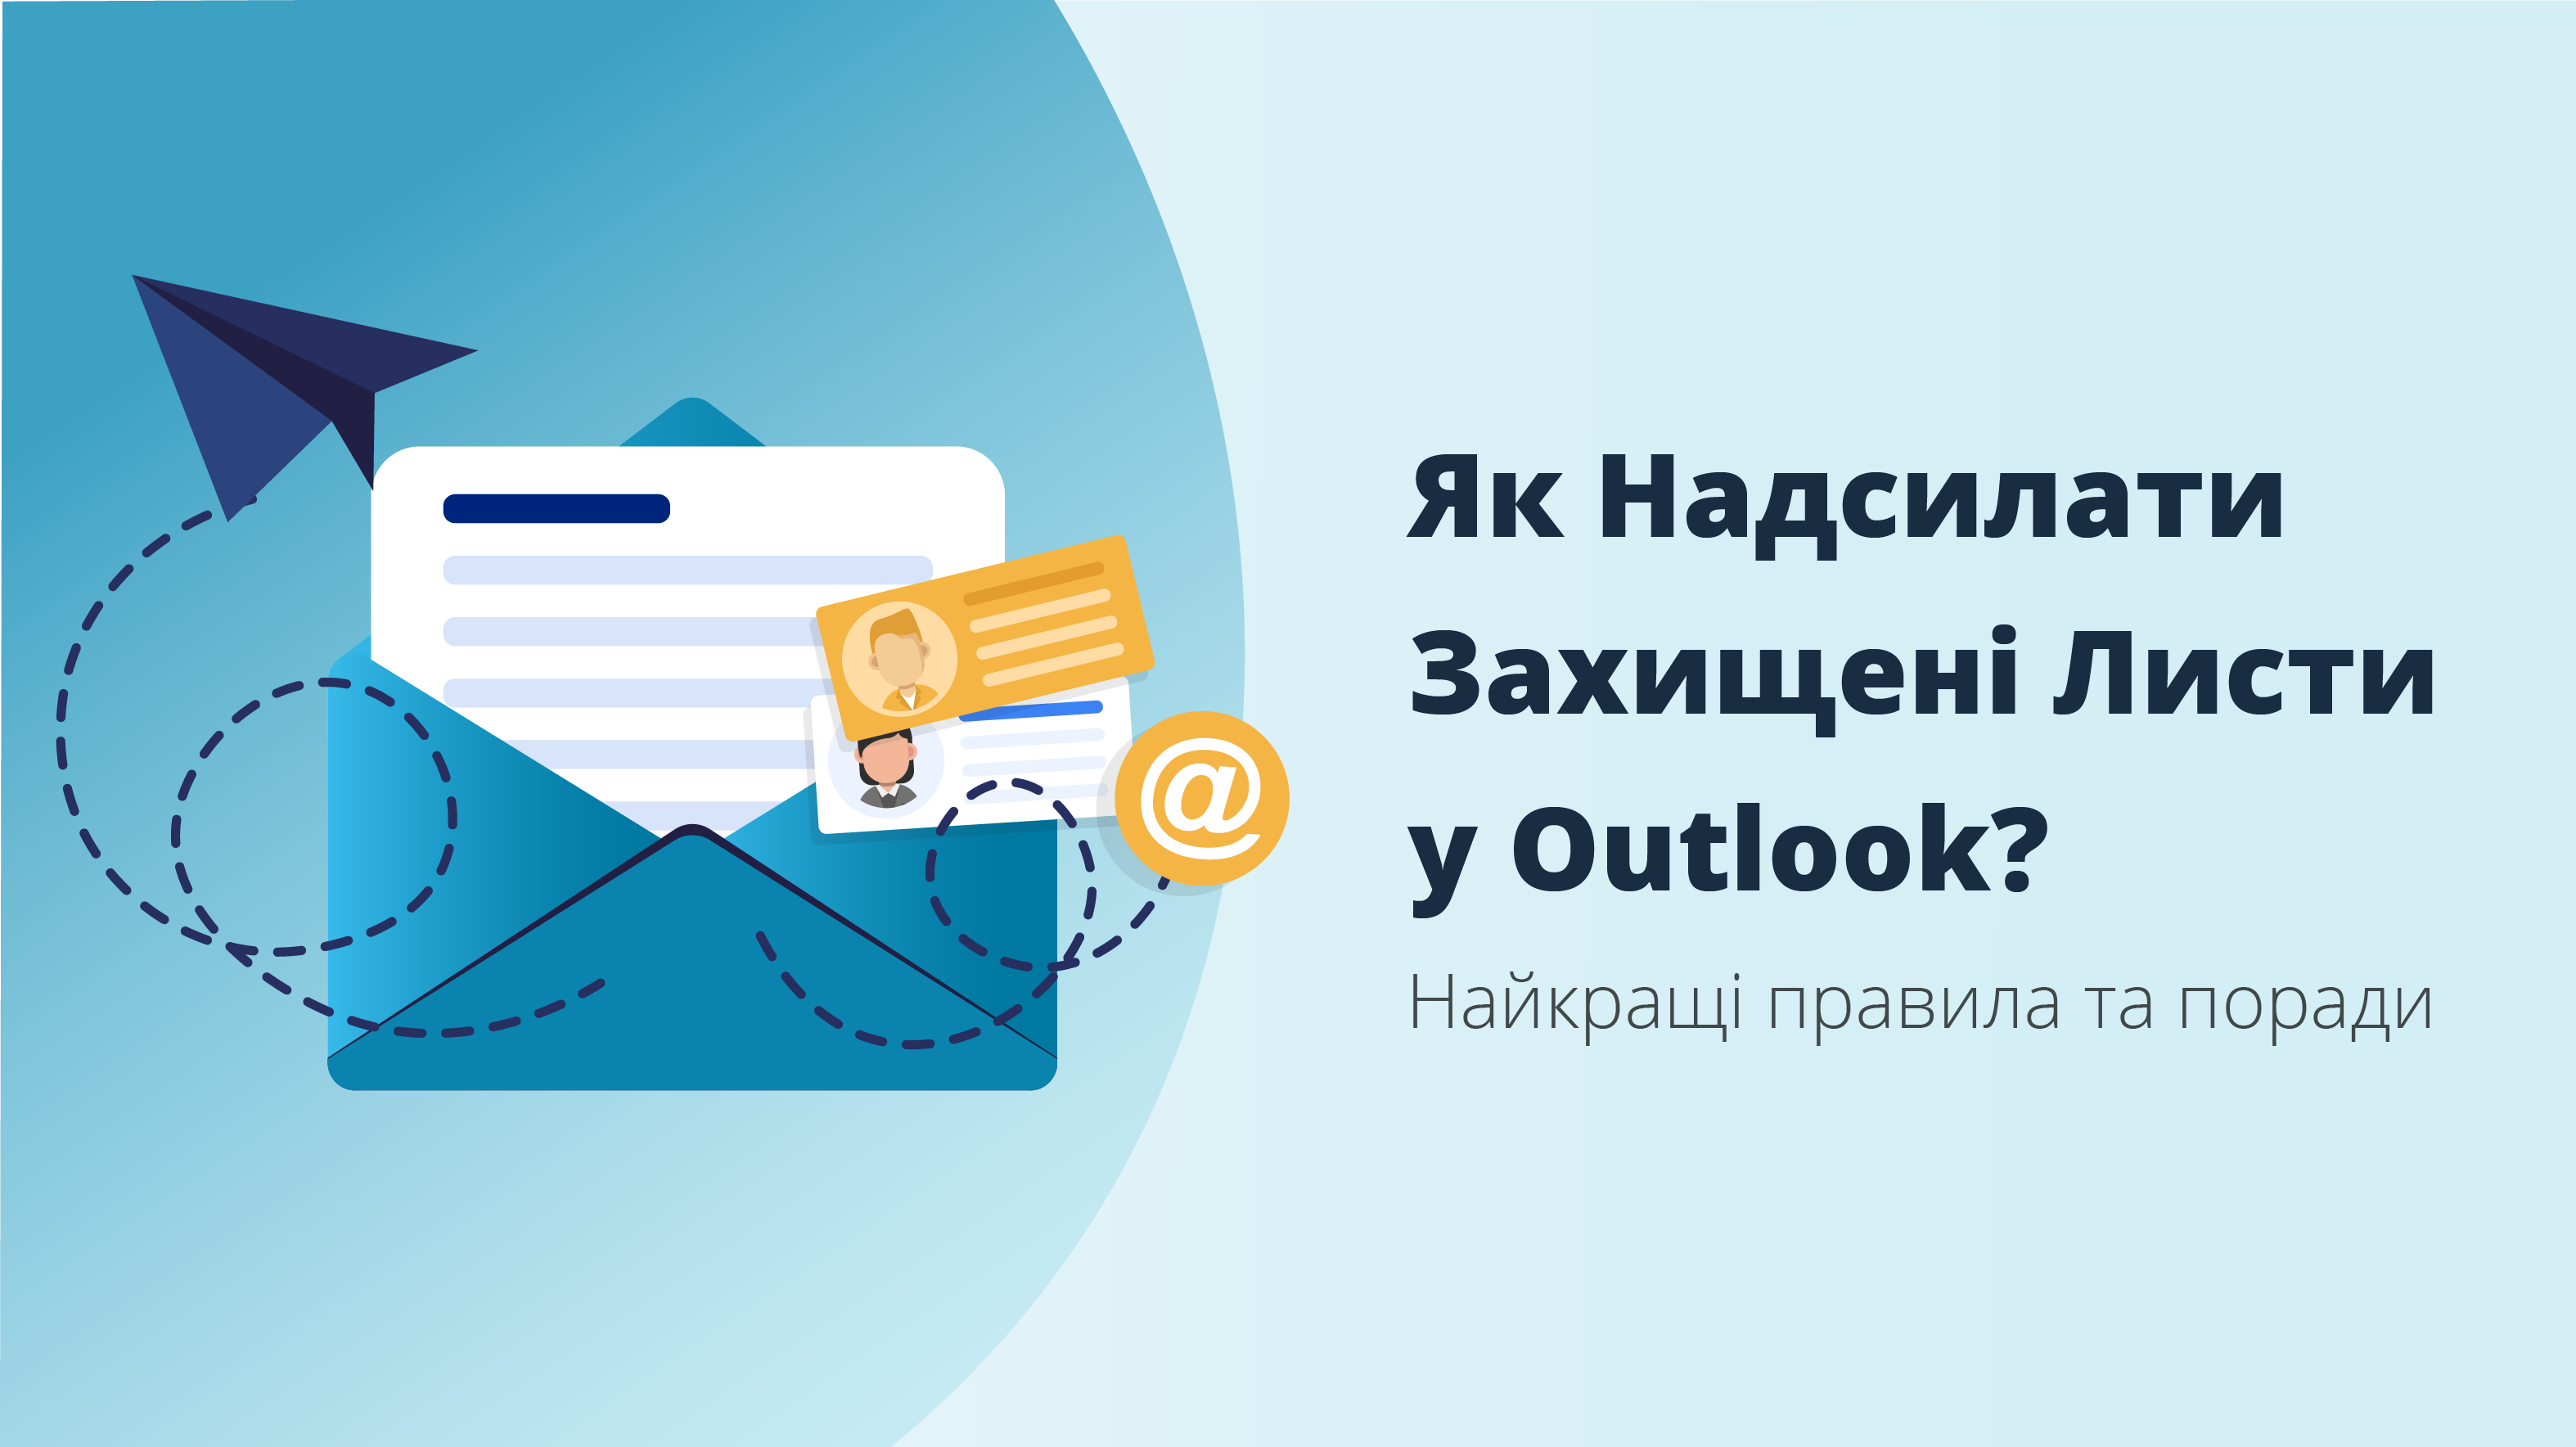 How to send secure email in Outlook